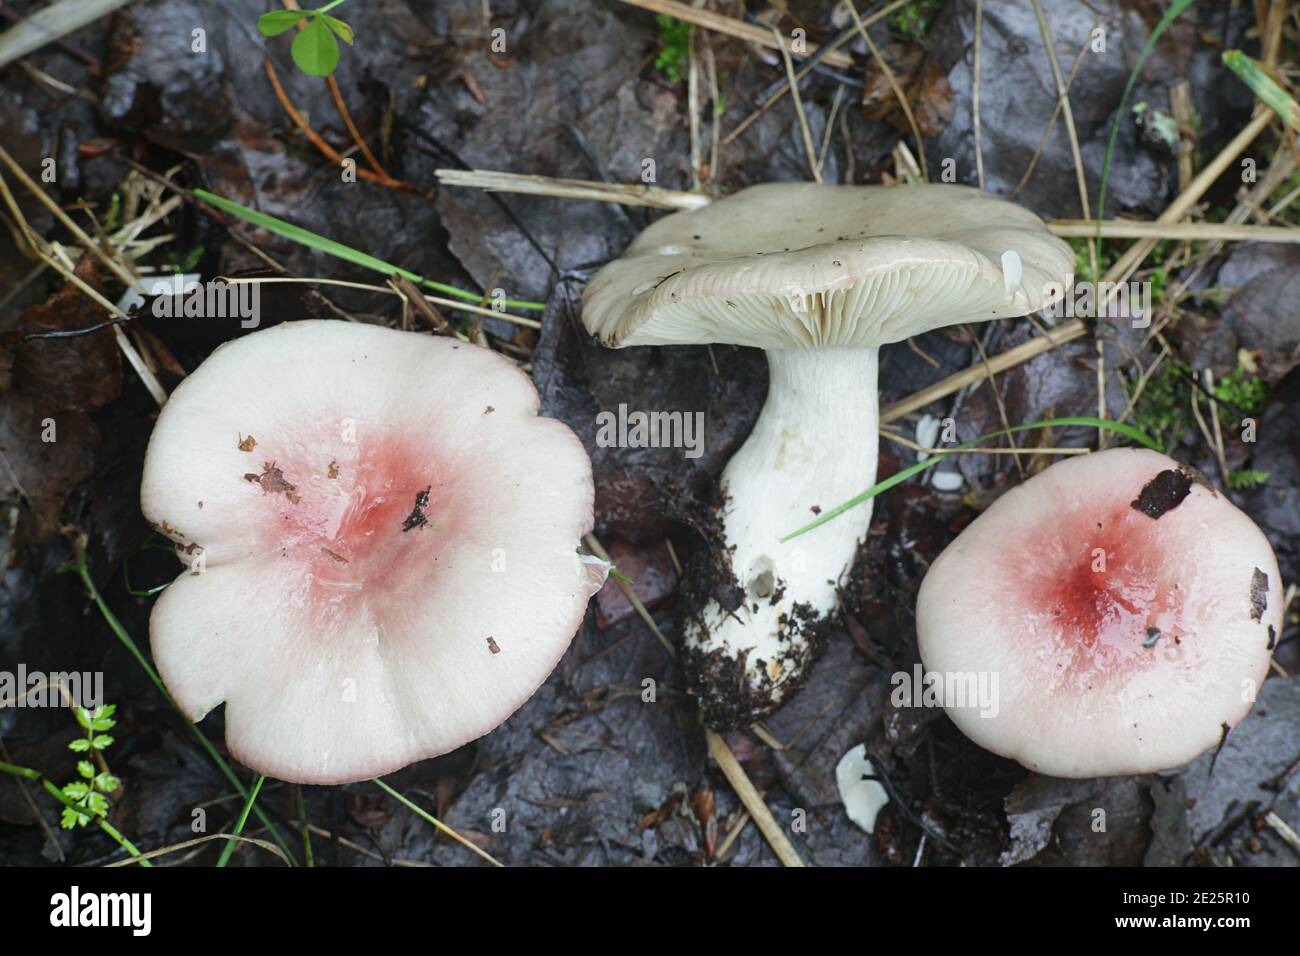 Russula depallens, known as bleached brittlegill, wild mushrooms from Finland Stock Photo